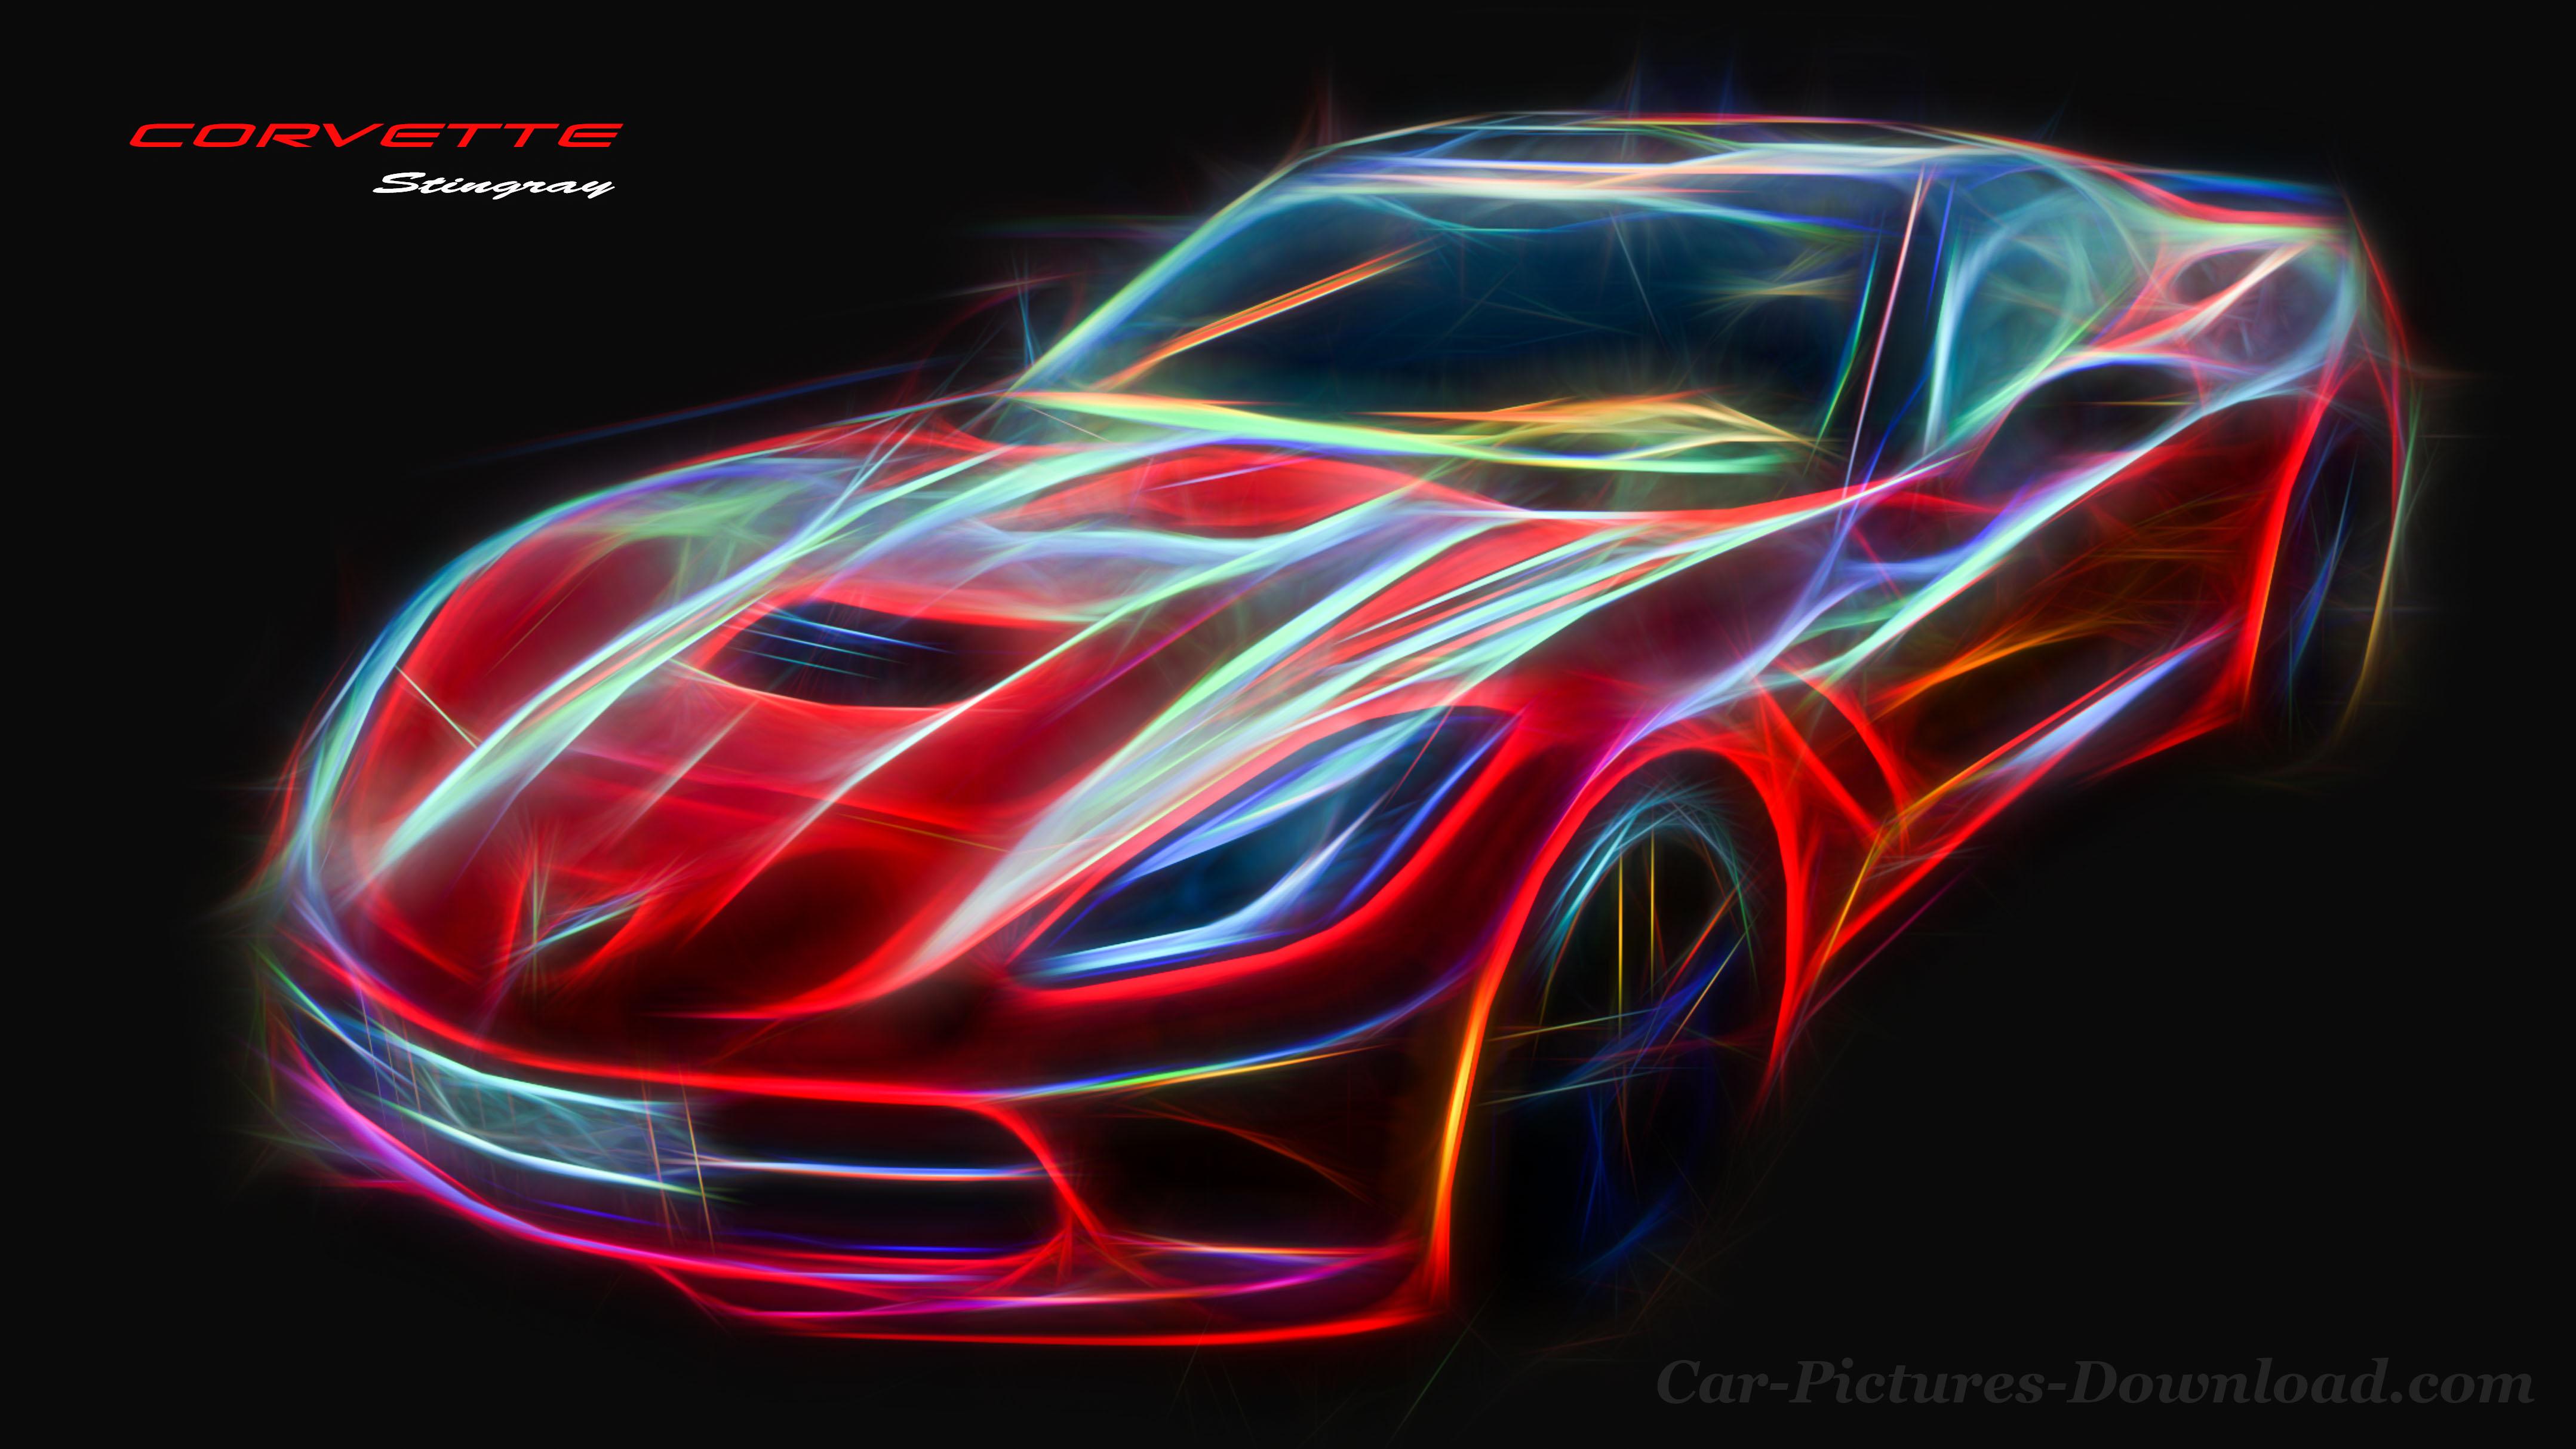 Corvette Wallpaper For All Devices Quality And Free To